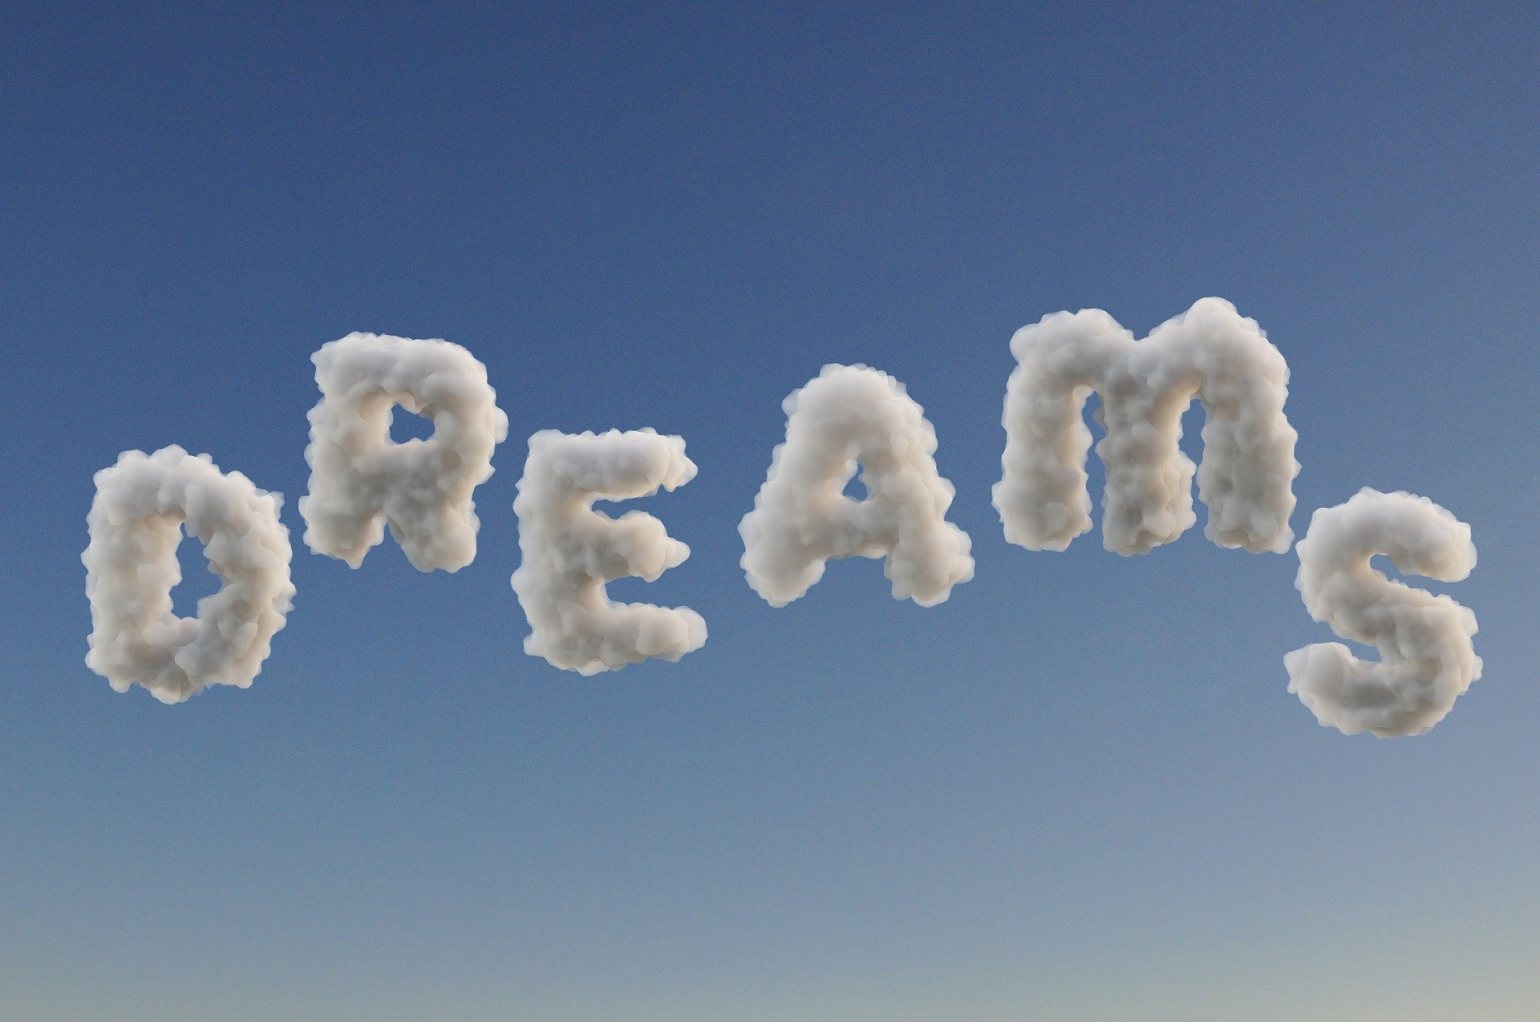 Dreams spelled out in clouds